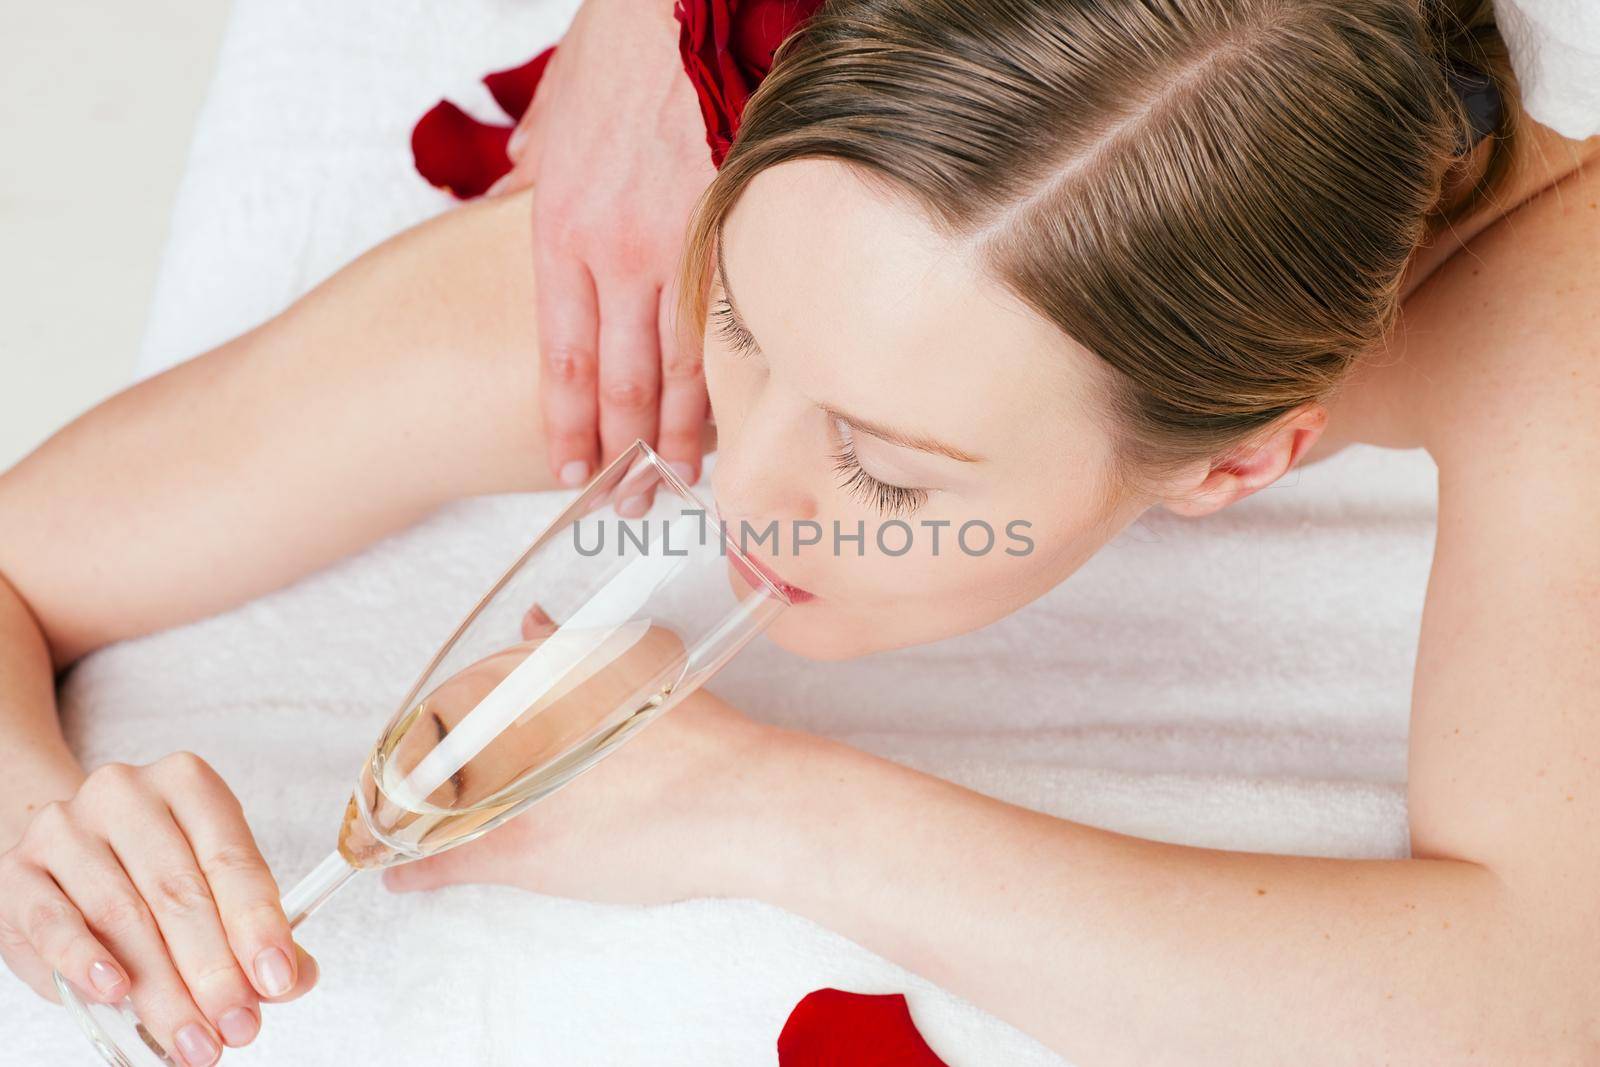 Woman enjoying a back massage in a spa setting drinking a glass of champagne